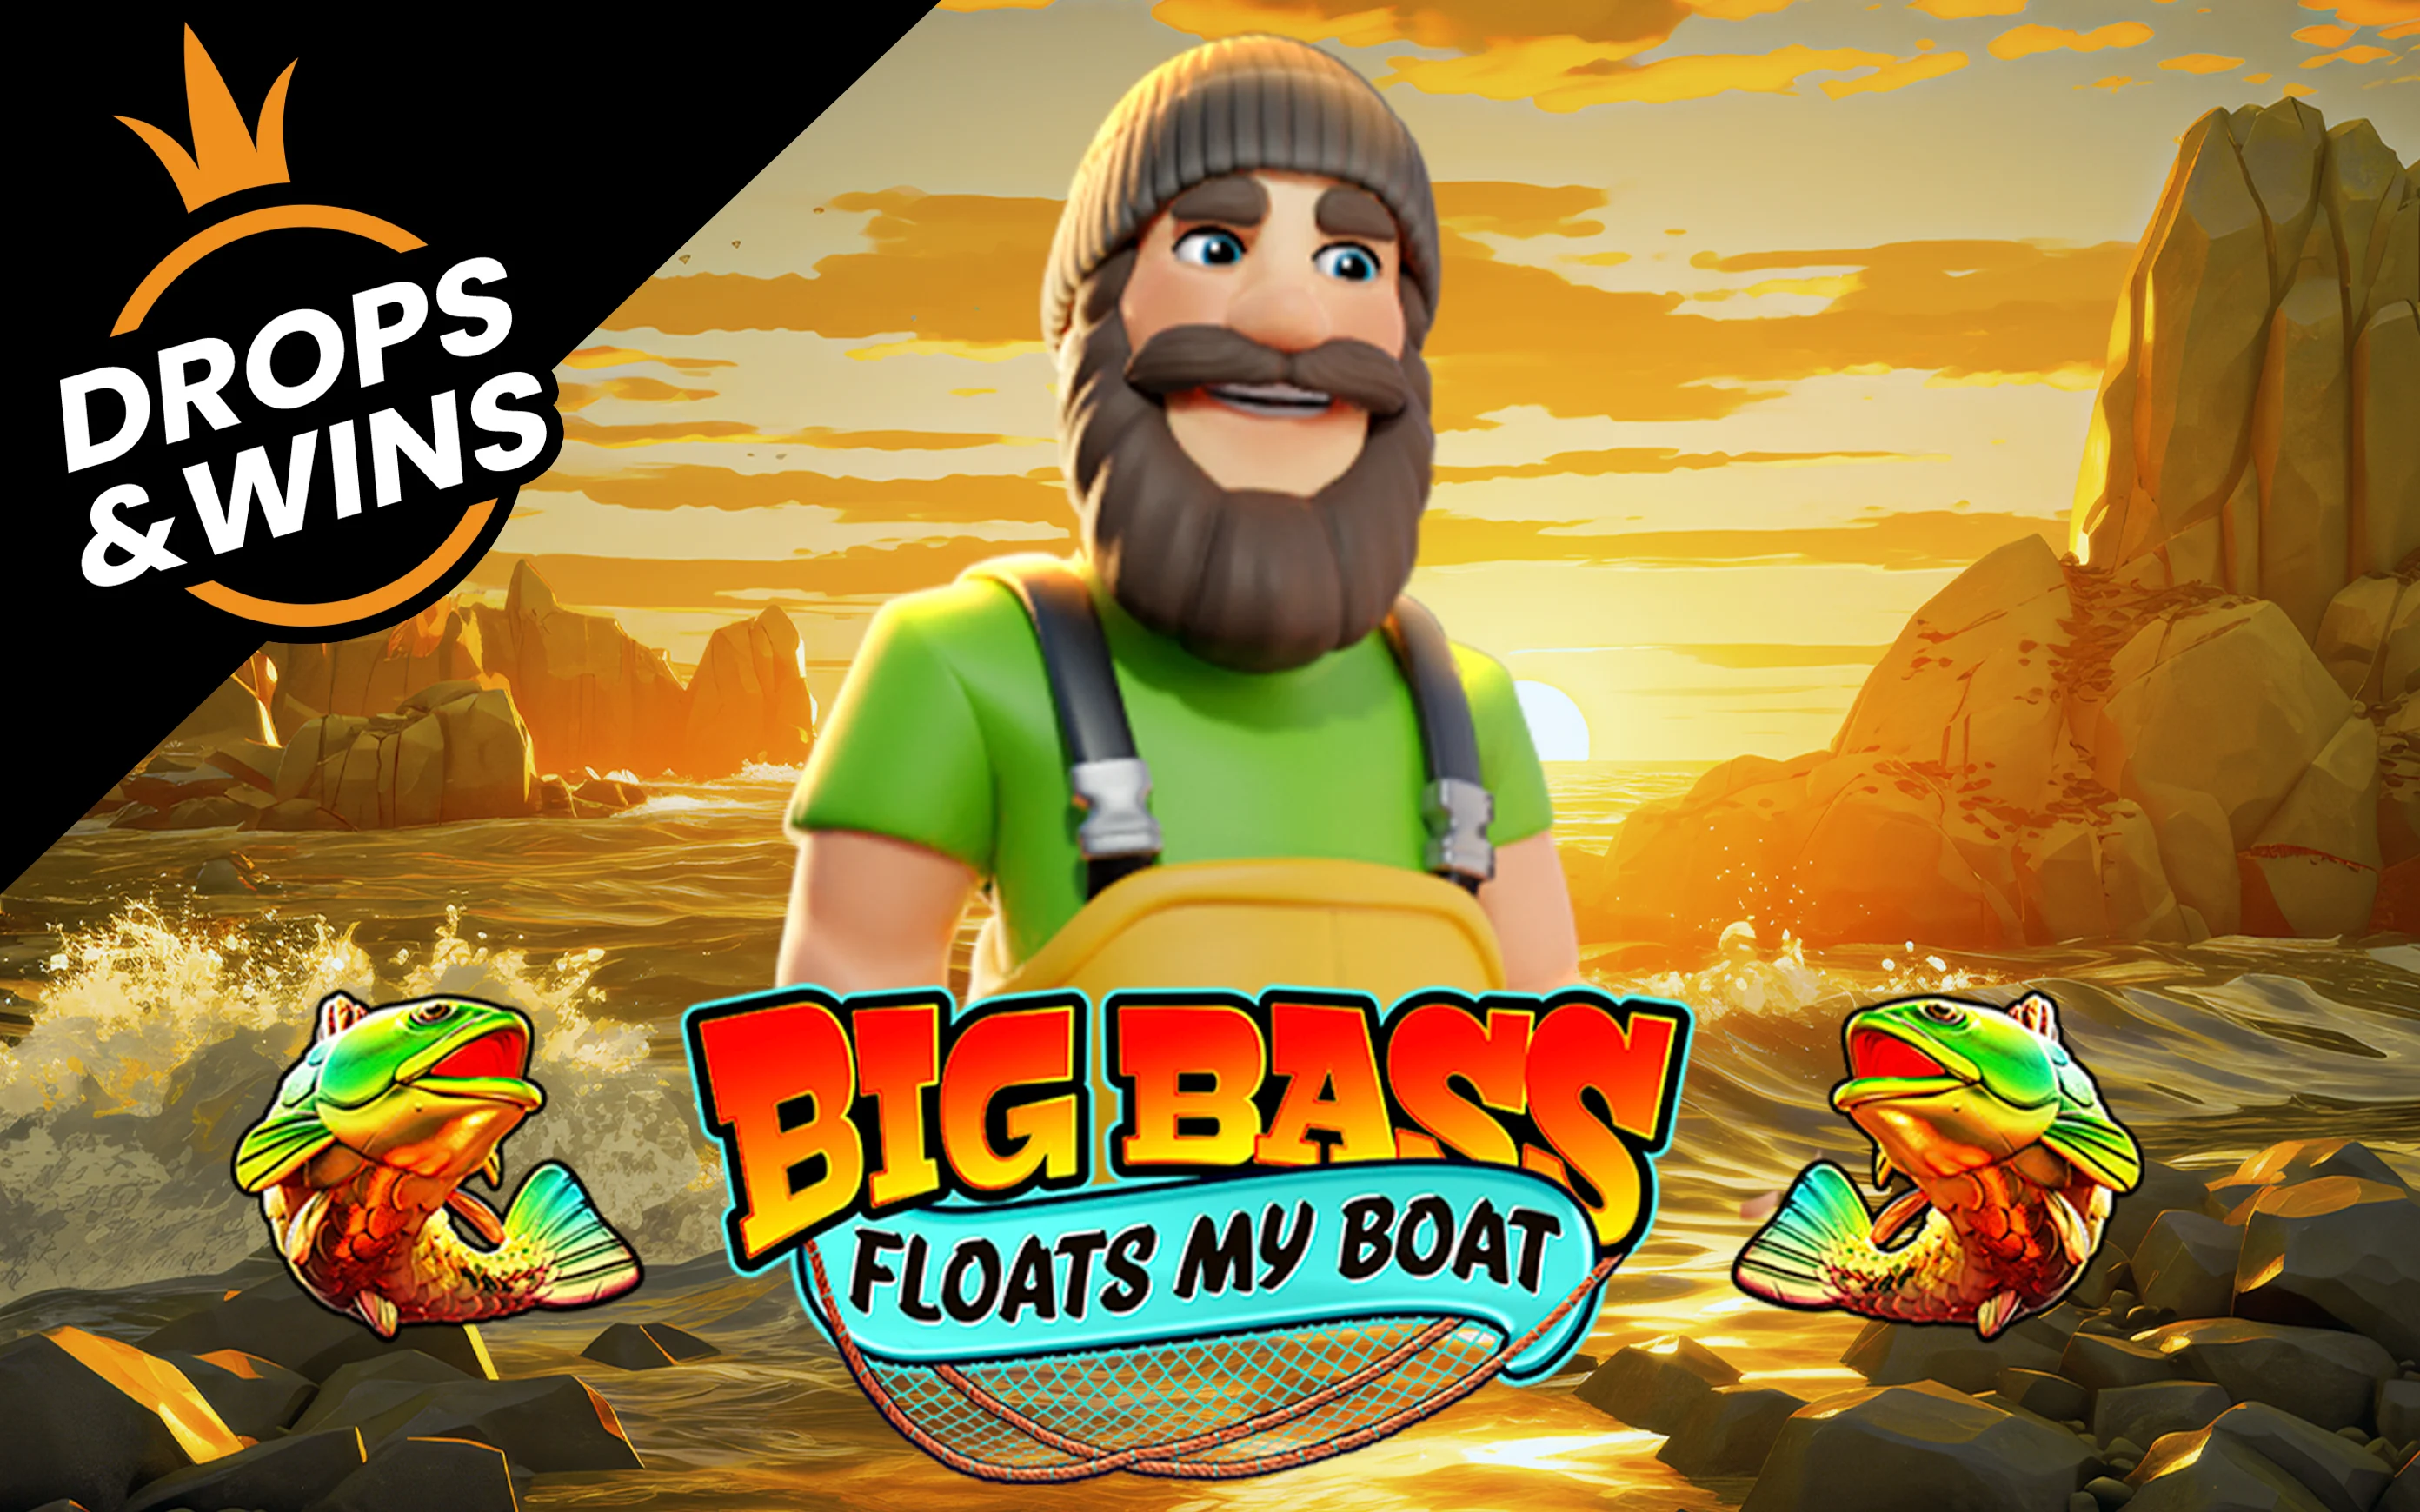 Play Big Bass Floats My Boat on Starcasino.be online casino